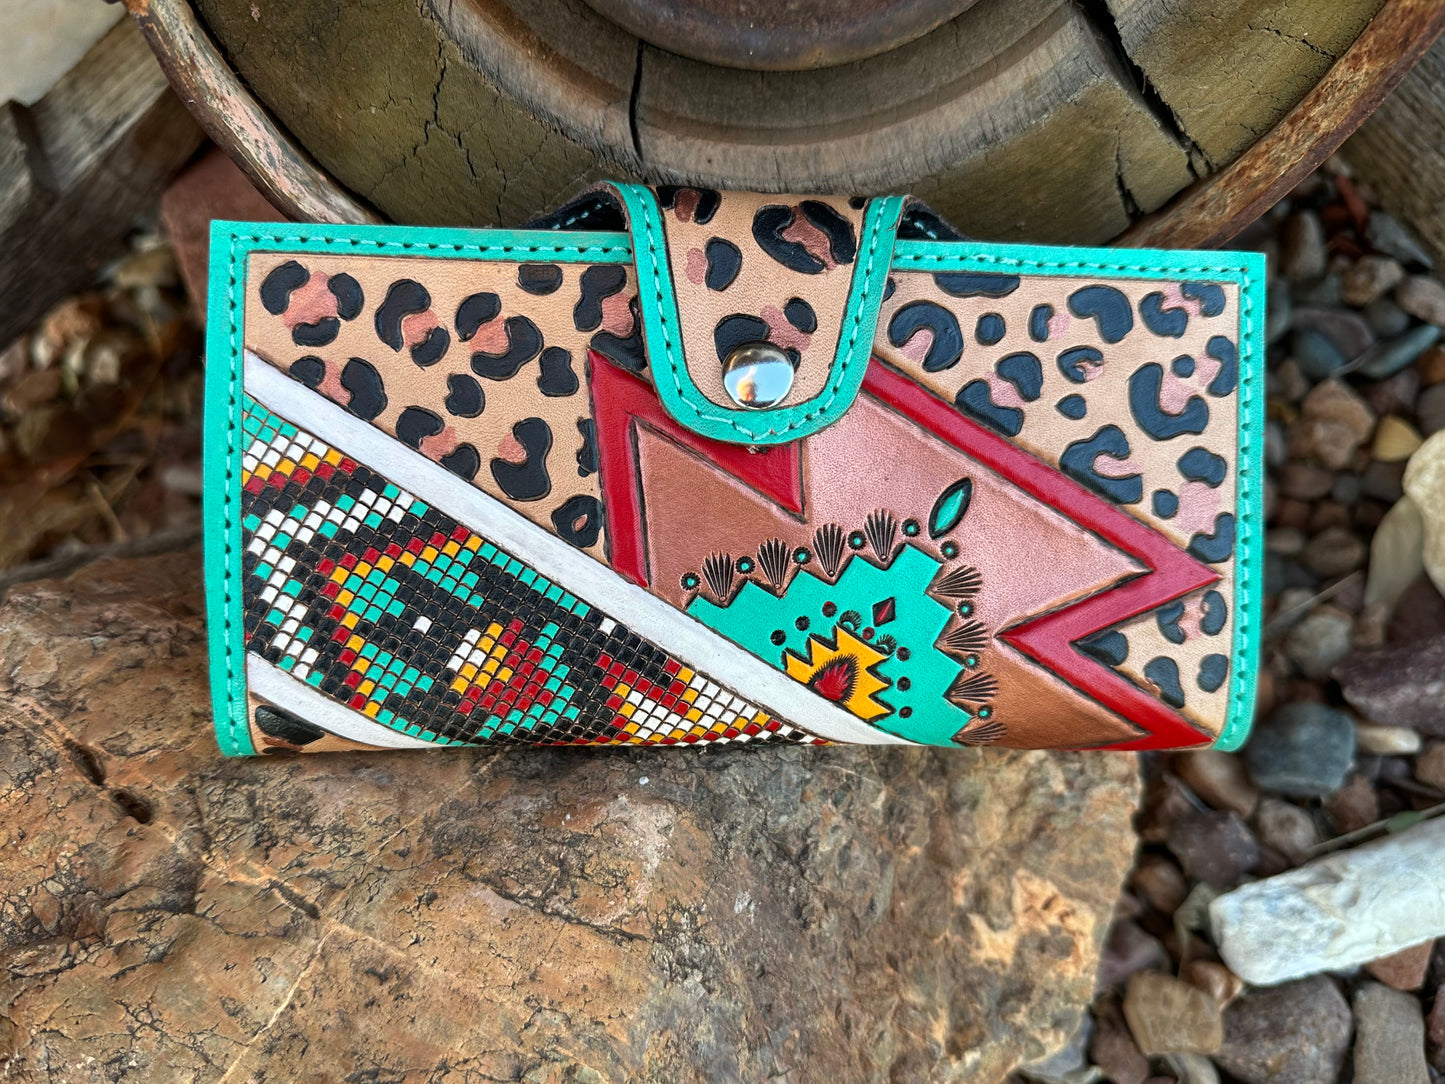 Southwestern tooled leather geometric and leopard print wallet